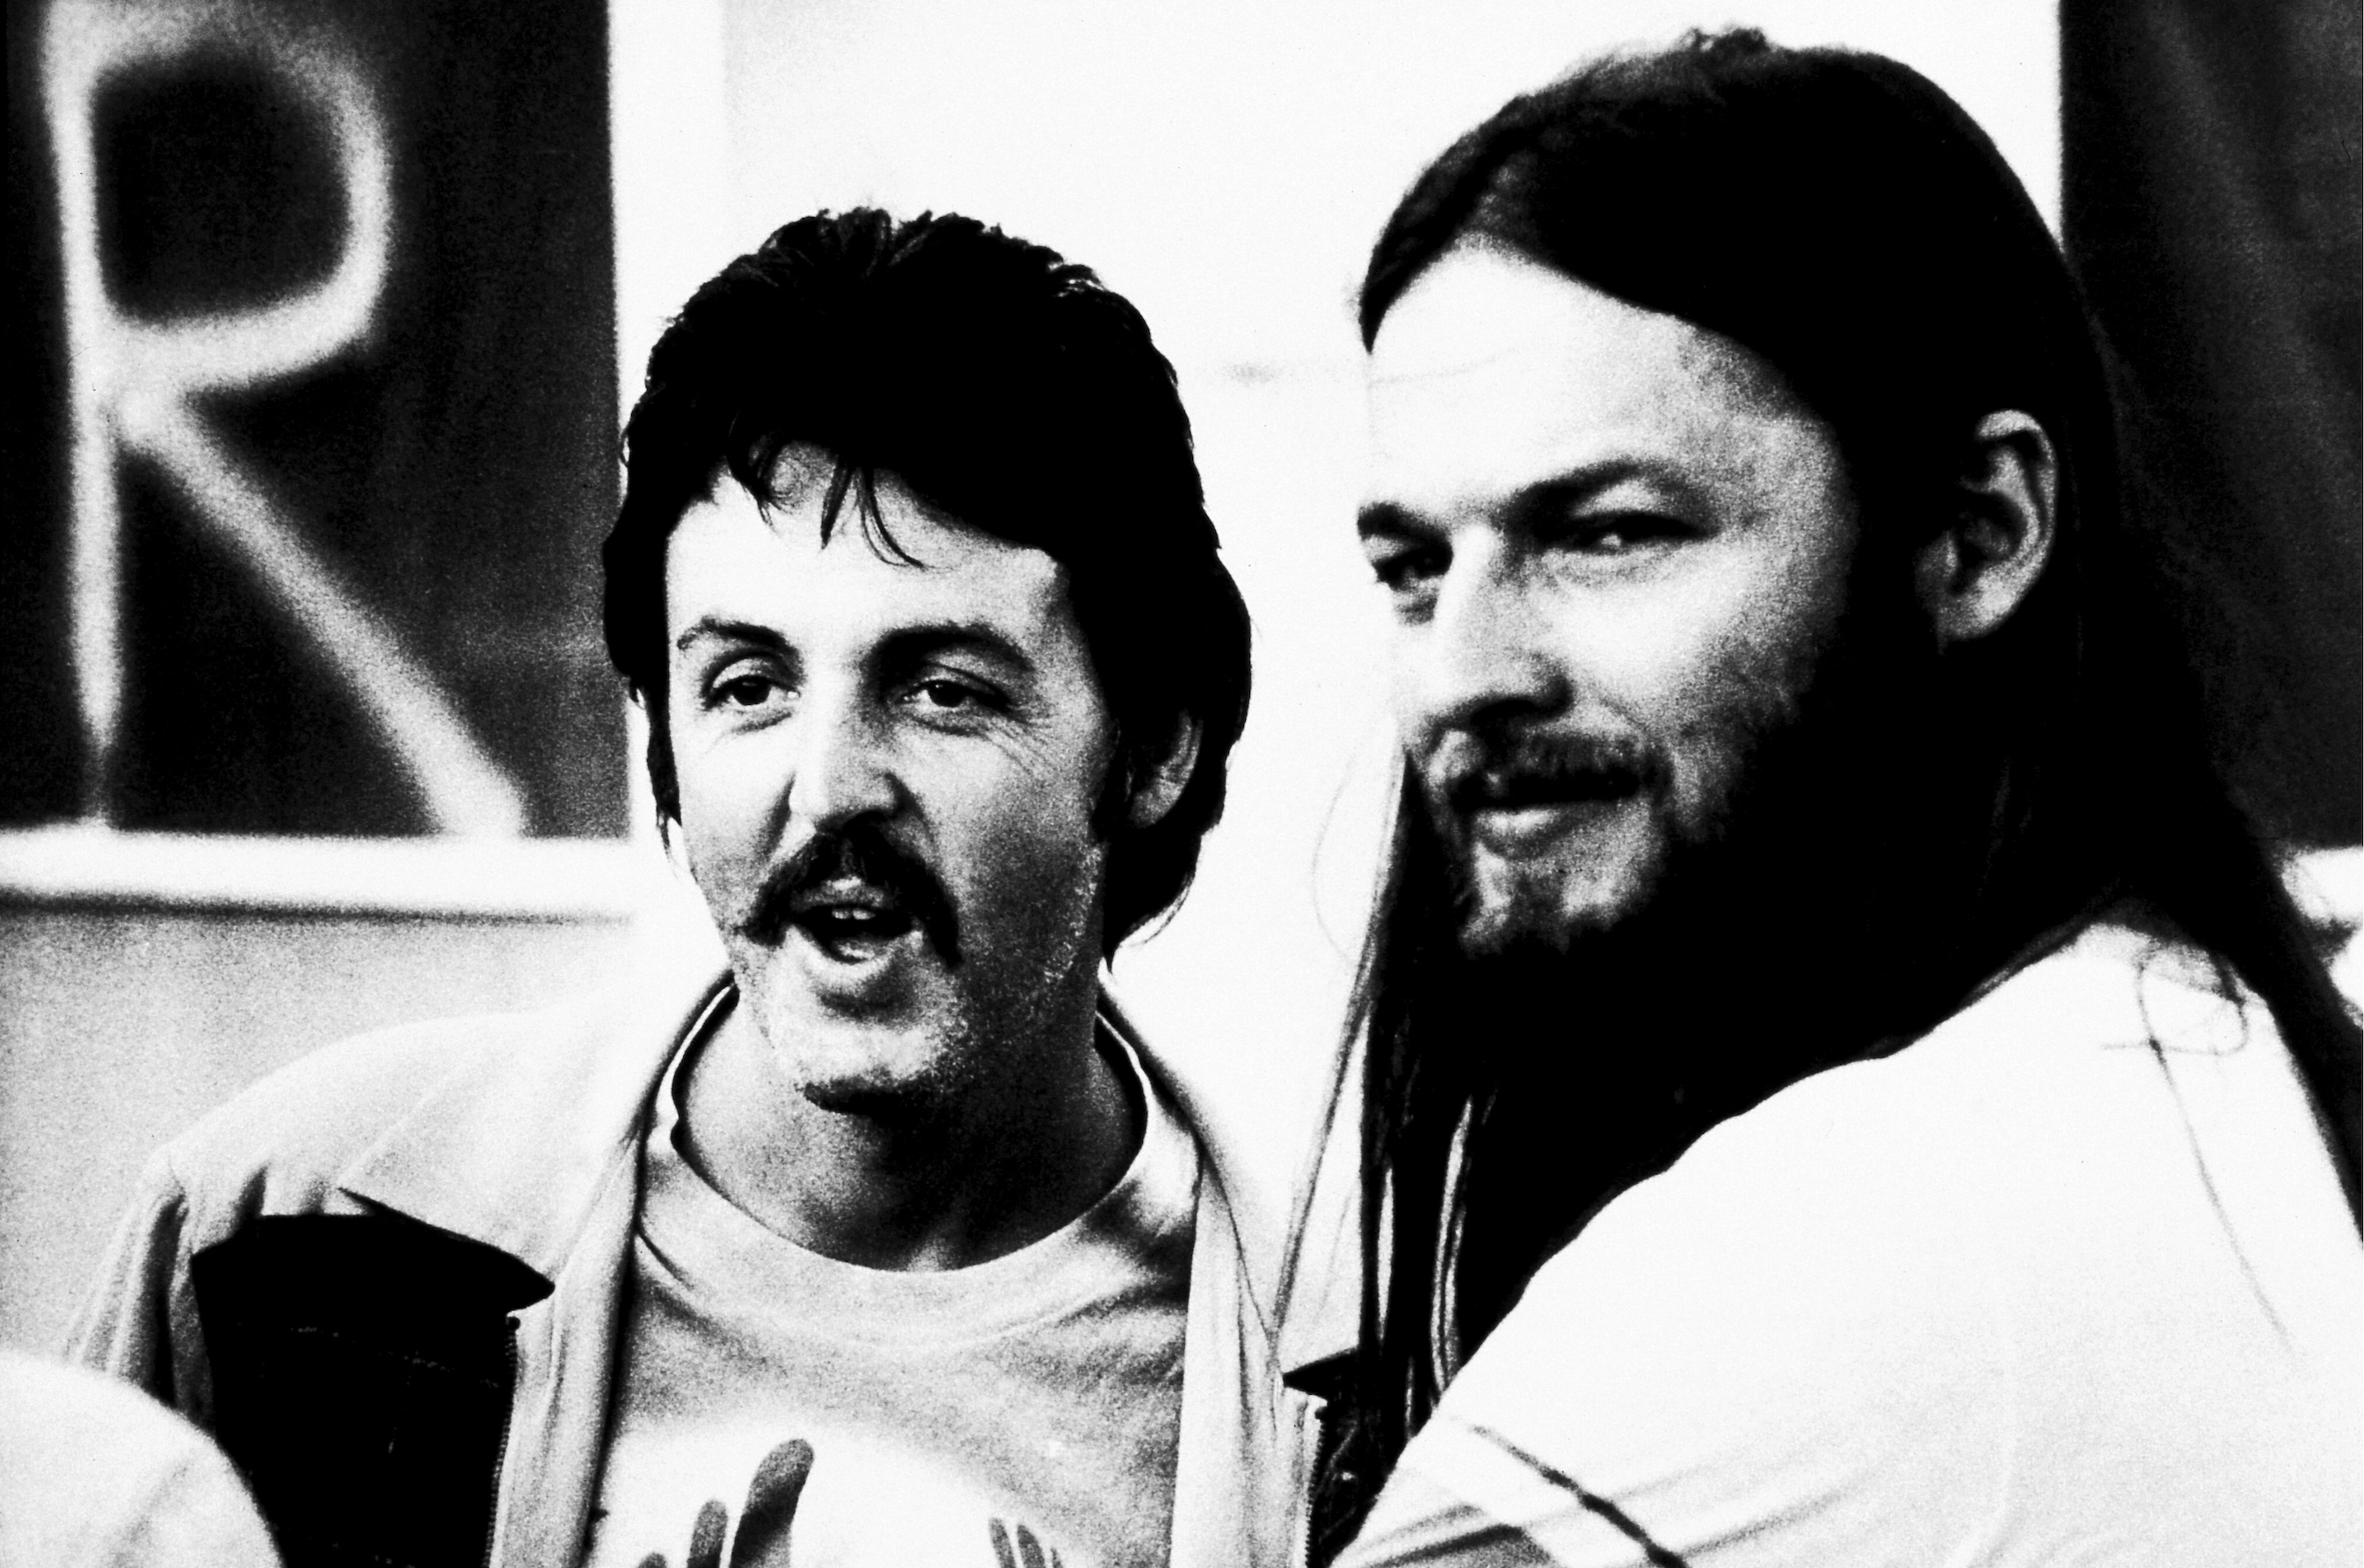 Paul McCartney with David Gilmour of Pink Floyd at Knebworth Music Festival, 1976